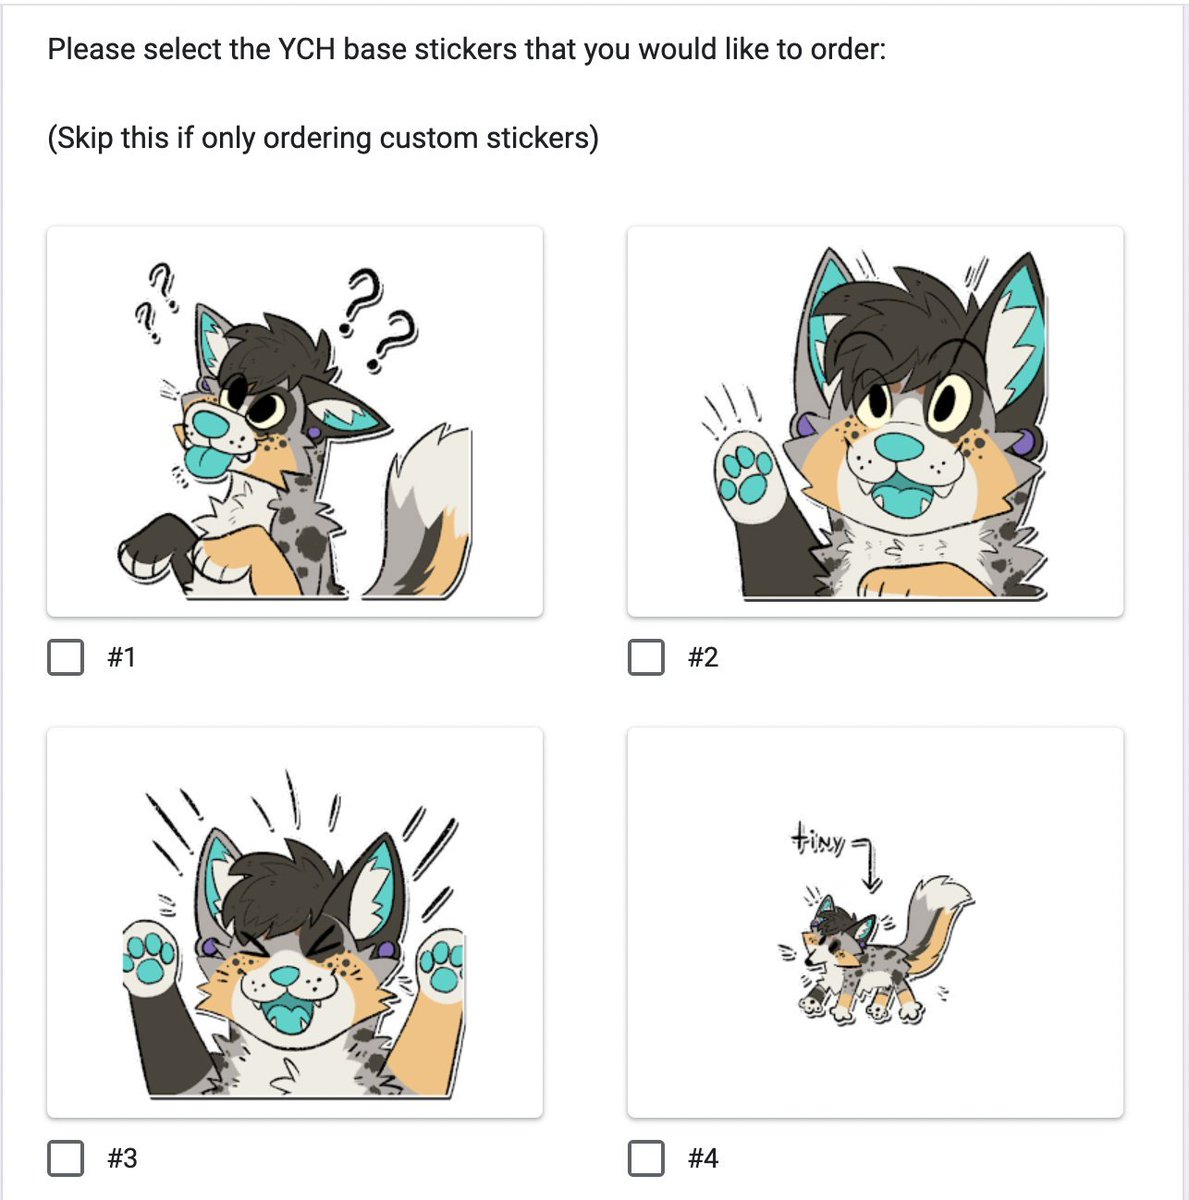 🚨Telegram Sticker C0missions close TOMORROW @ 11 PM EST!!🚨 - Custom and YCH stickers available - 74 YCH Base Options - Base Stickers = 💲3⃣5⃣ - Custom Stickers = 💲4⃣0⃣ - Bulk pricing available - Payment plans available - 6 week turnaround See 0rdering Info BELOW!! 🔽